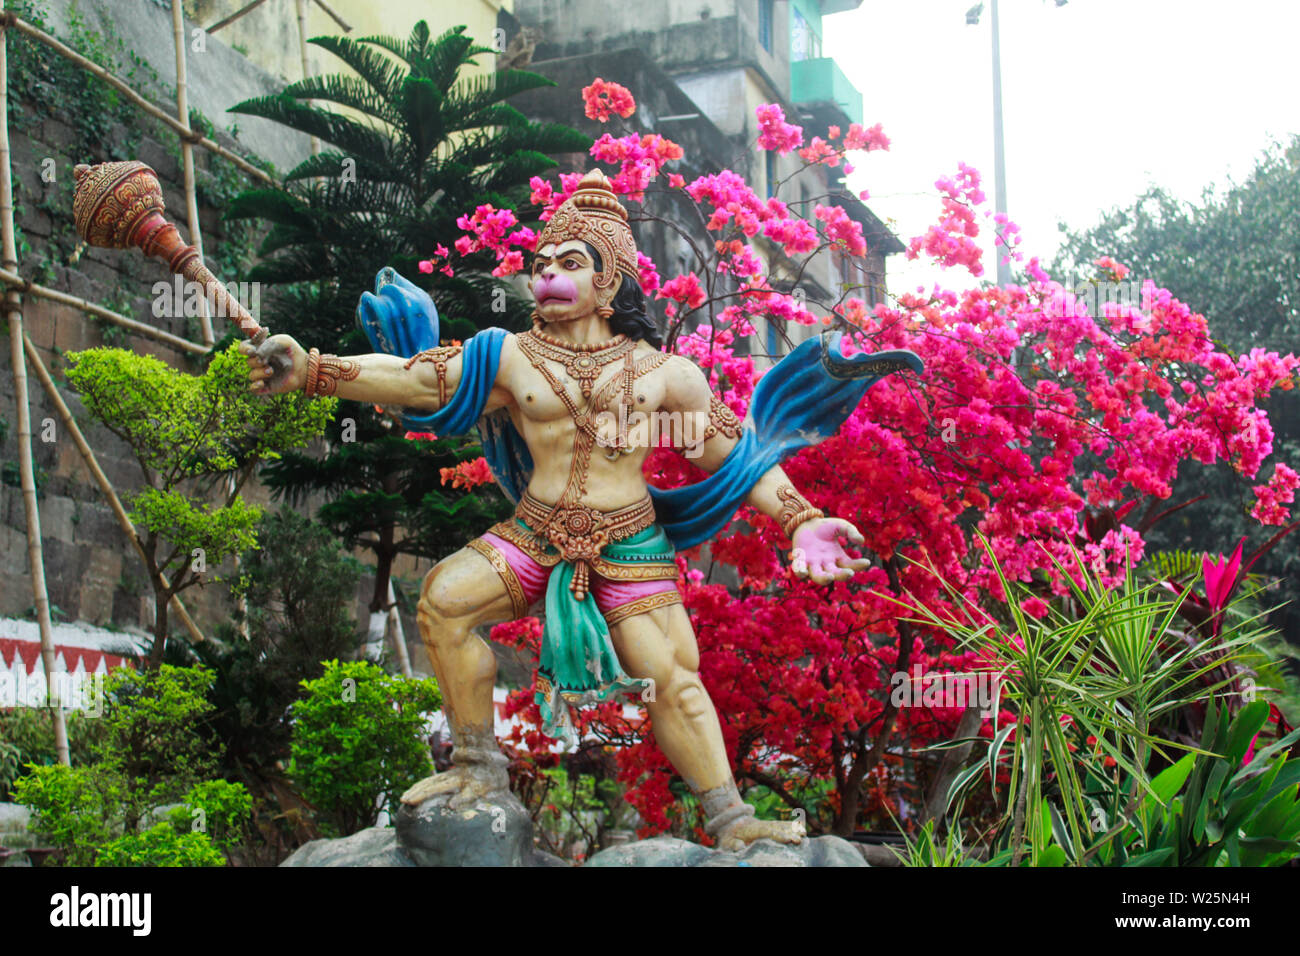 Statue of lord mahaveer in a garden Stock Photo